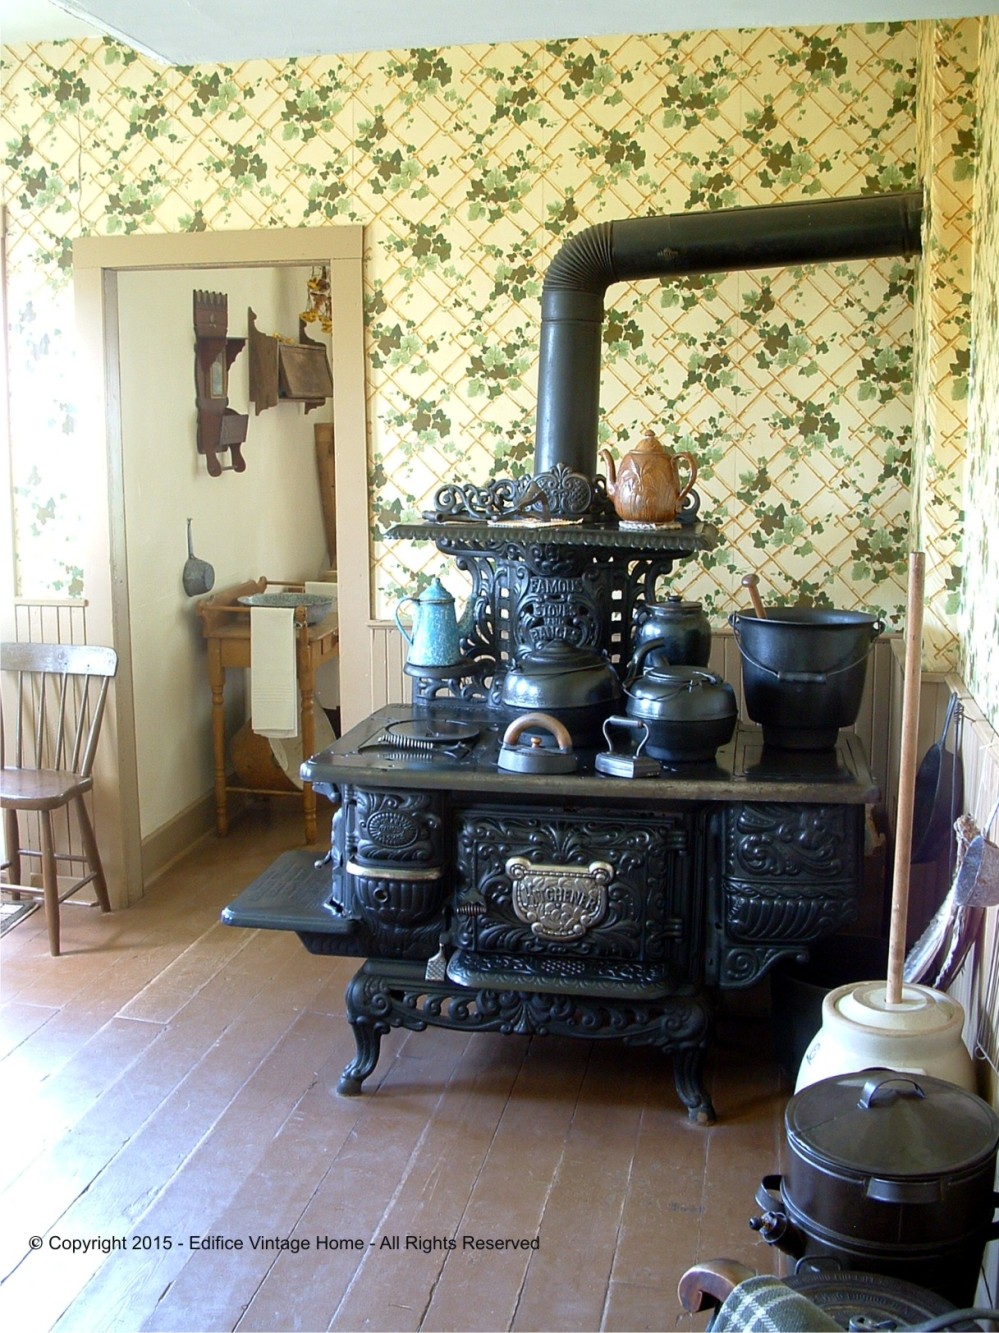 https://oldhomeliving.files.wordpress.com/2015/02/antique-stoves-copyright-2015-edifice-5.jpg?w=1000&h=1334